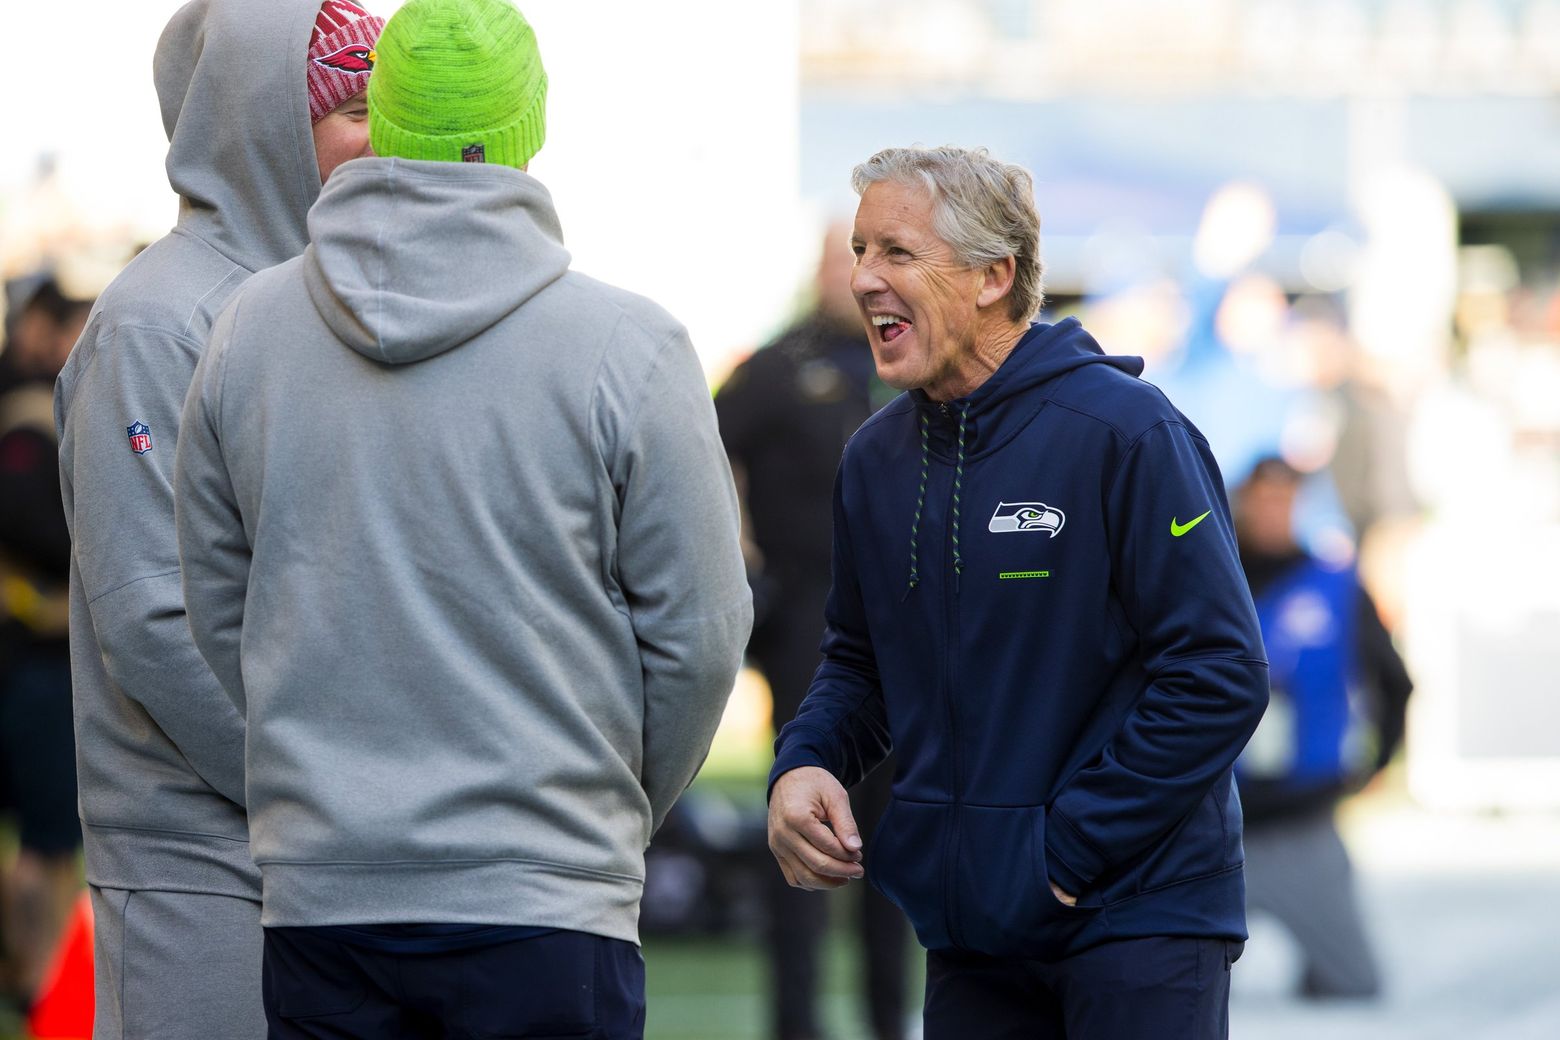 At age 66, Pete Carroll isnâ€™t slowing down. Heâ€™s ushering in the next